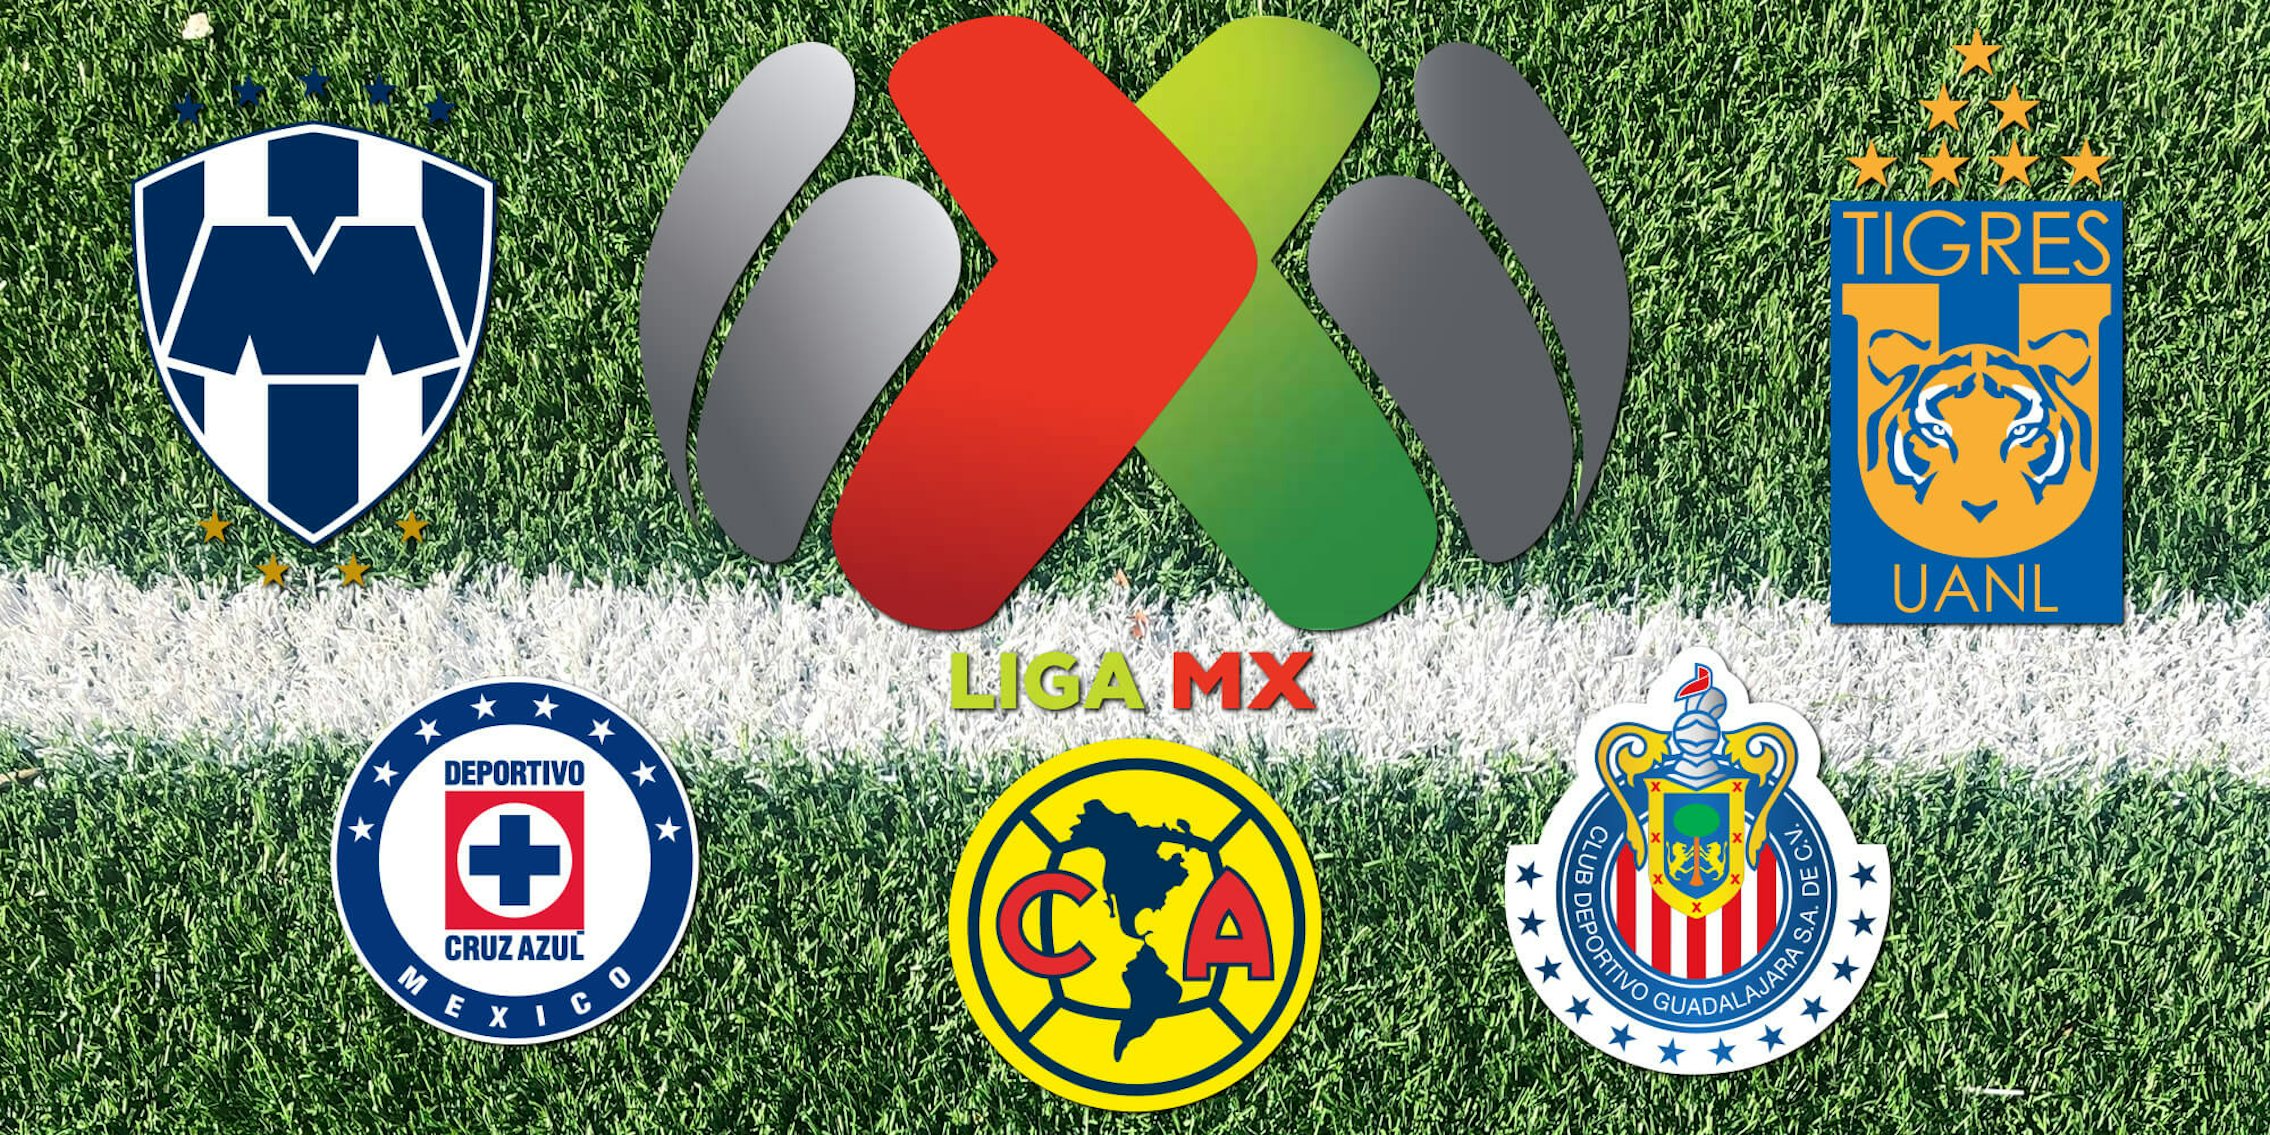 Liga MX record: which team has won the most Mexican league titles? - AS USA